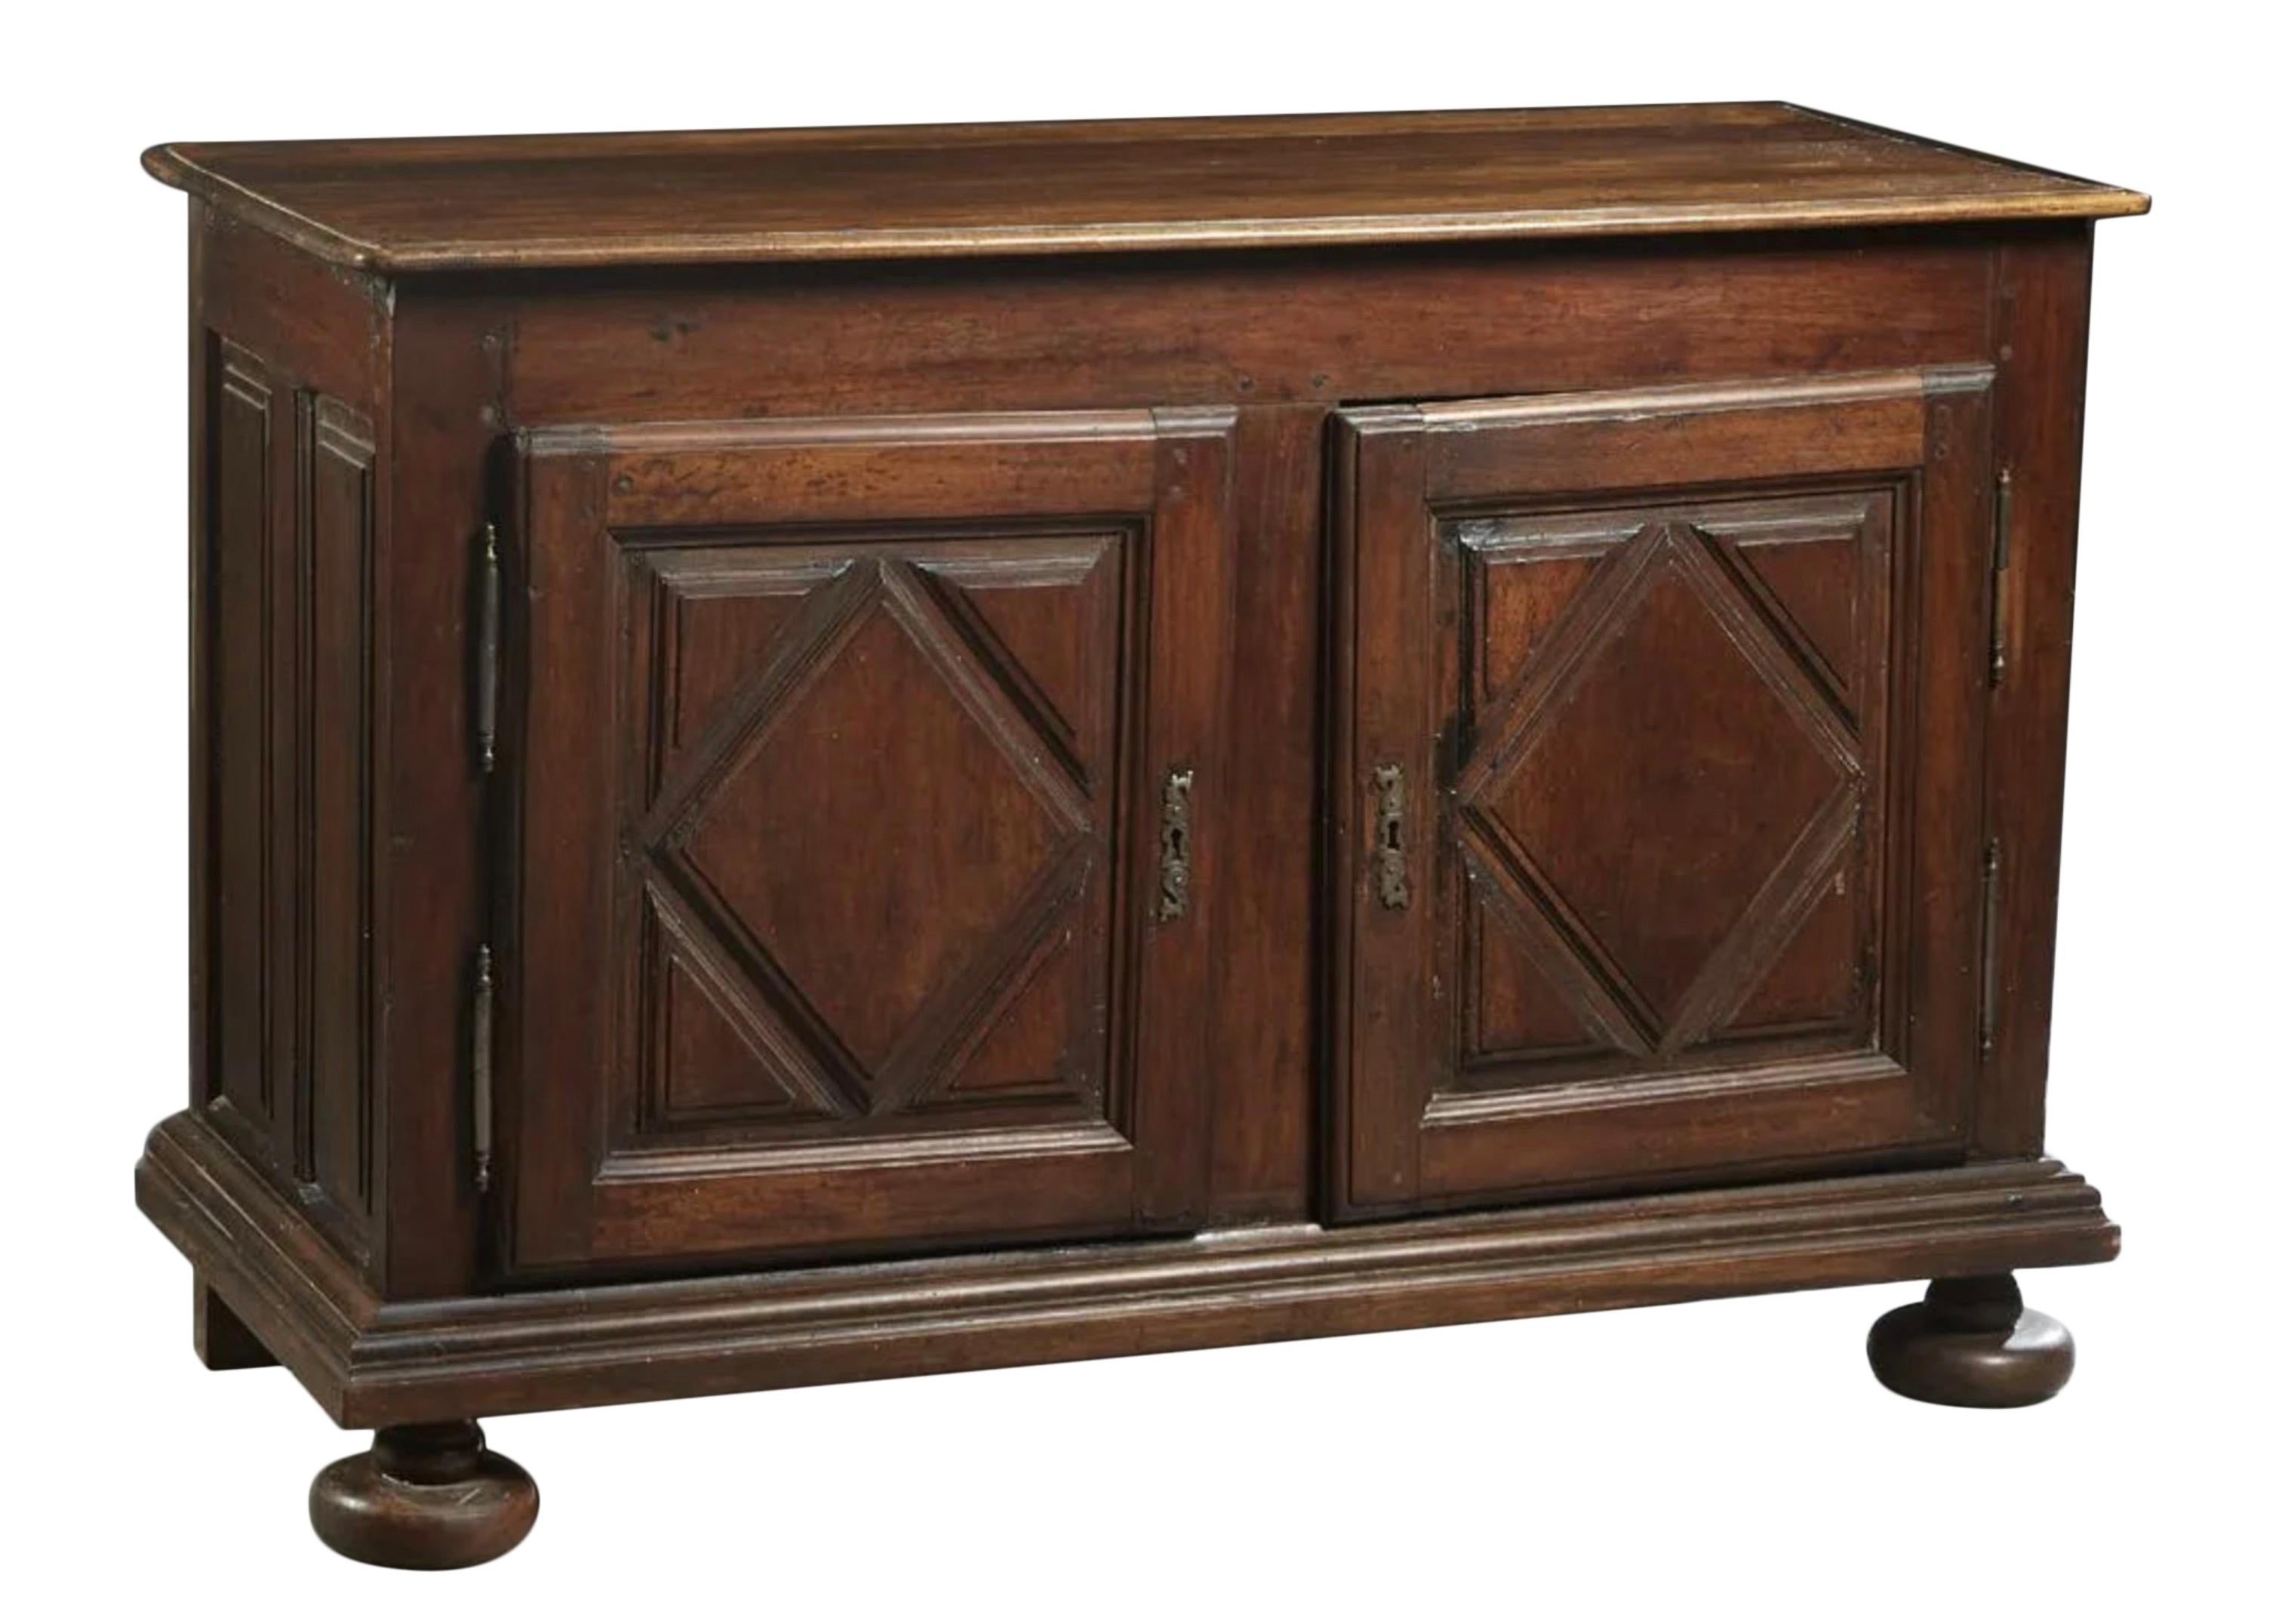 French Louis XIII Style Carved Walnut Sideboard, 19th c., the stepped rounded edge and corner top over double cupboard doors with applied geometric decoration and iron fiche hinges and escutcheons, on a stepped plinth base, on large turned bun feet,